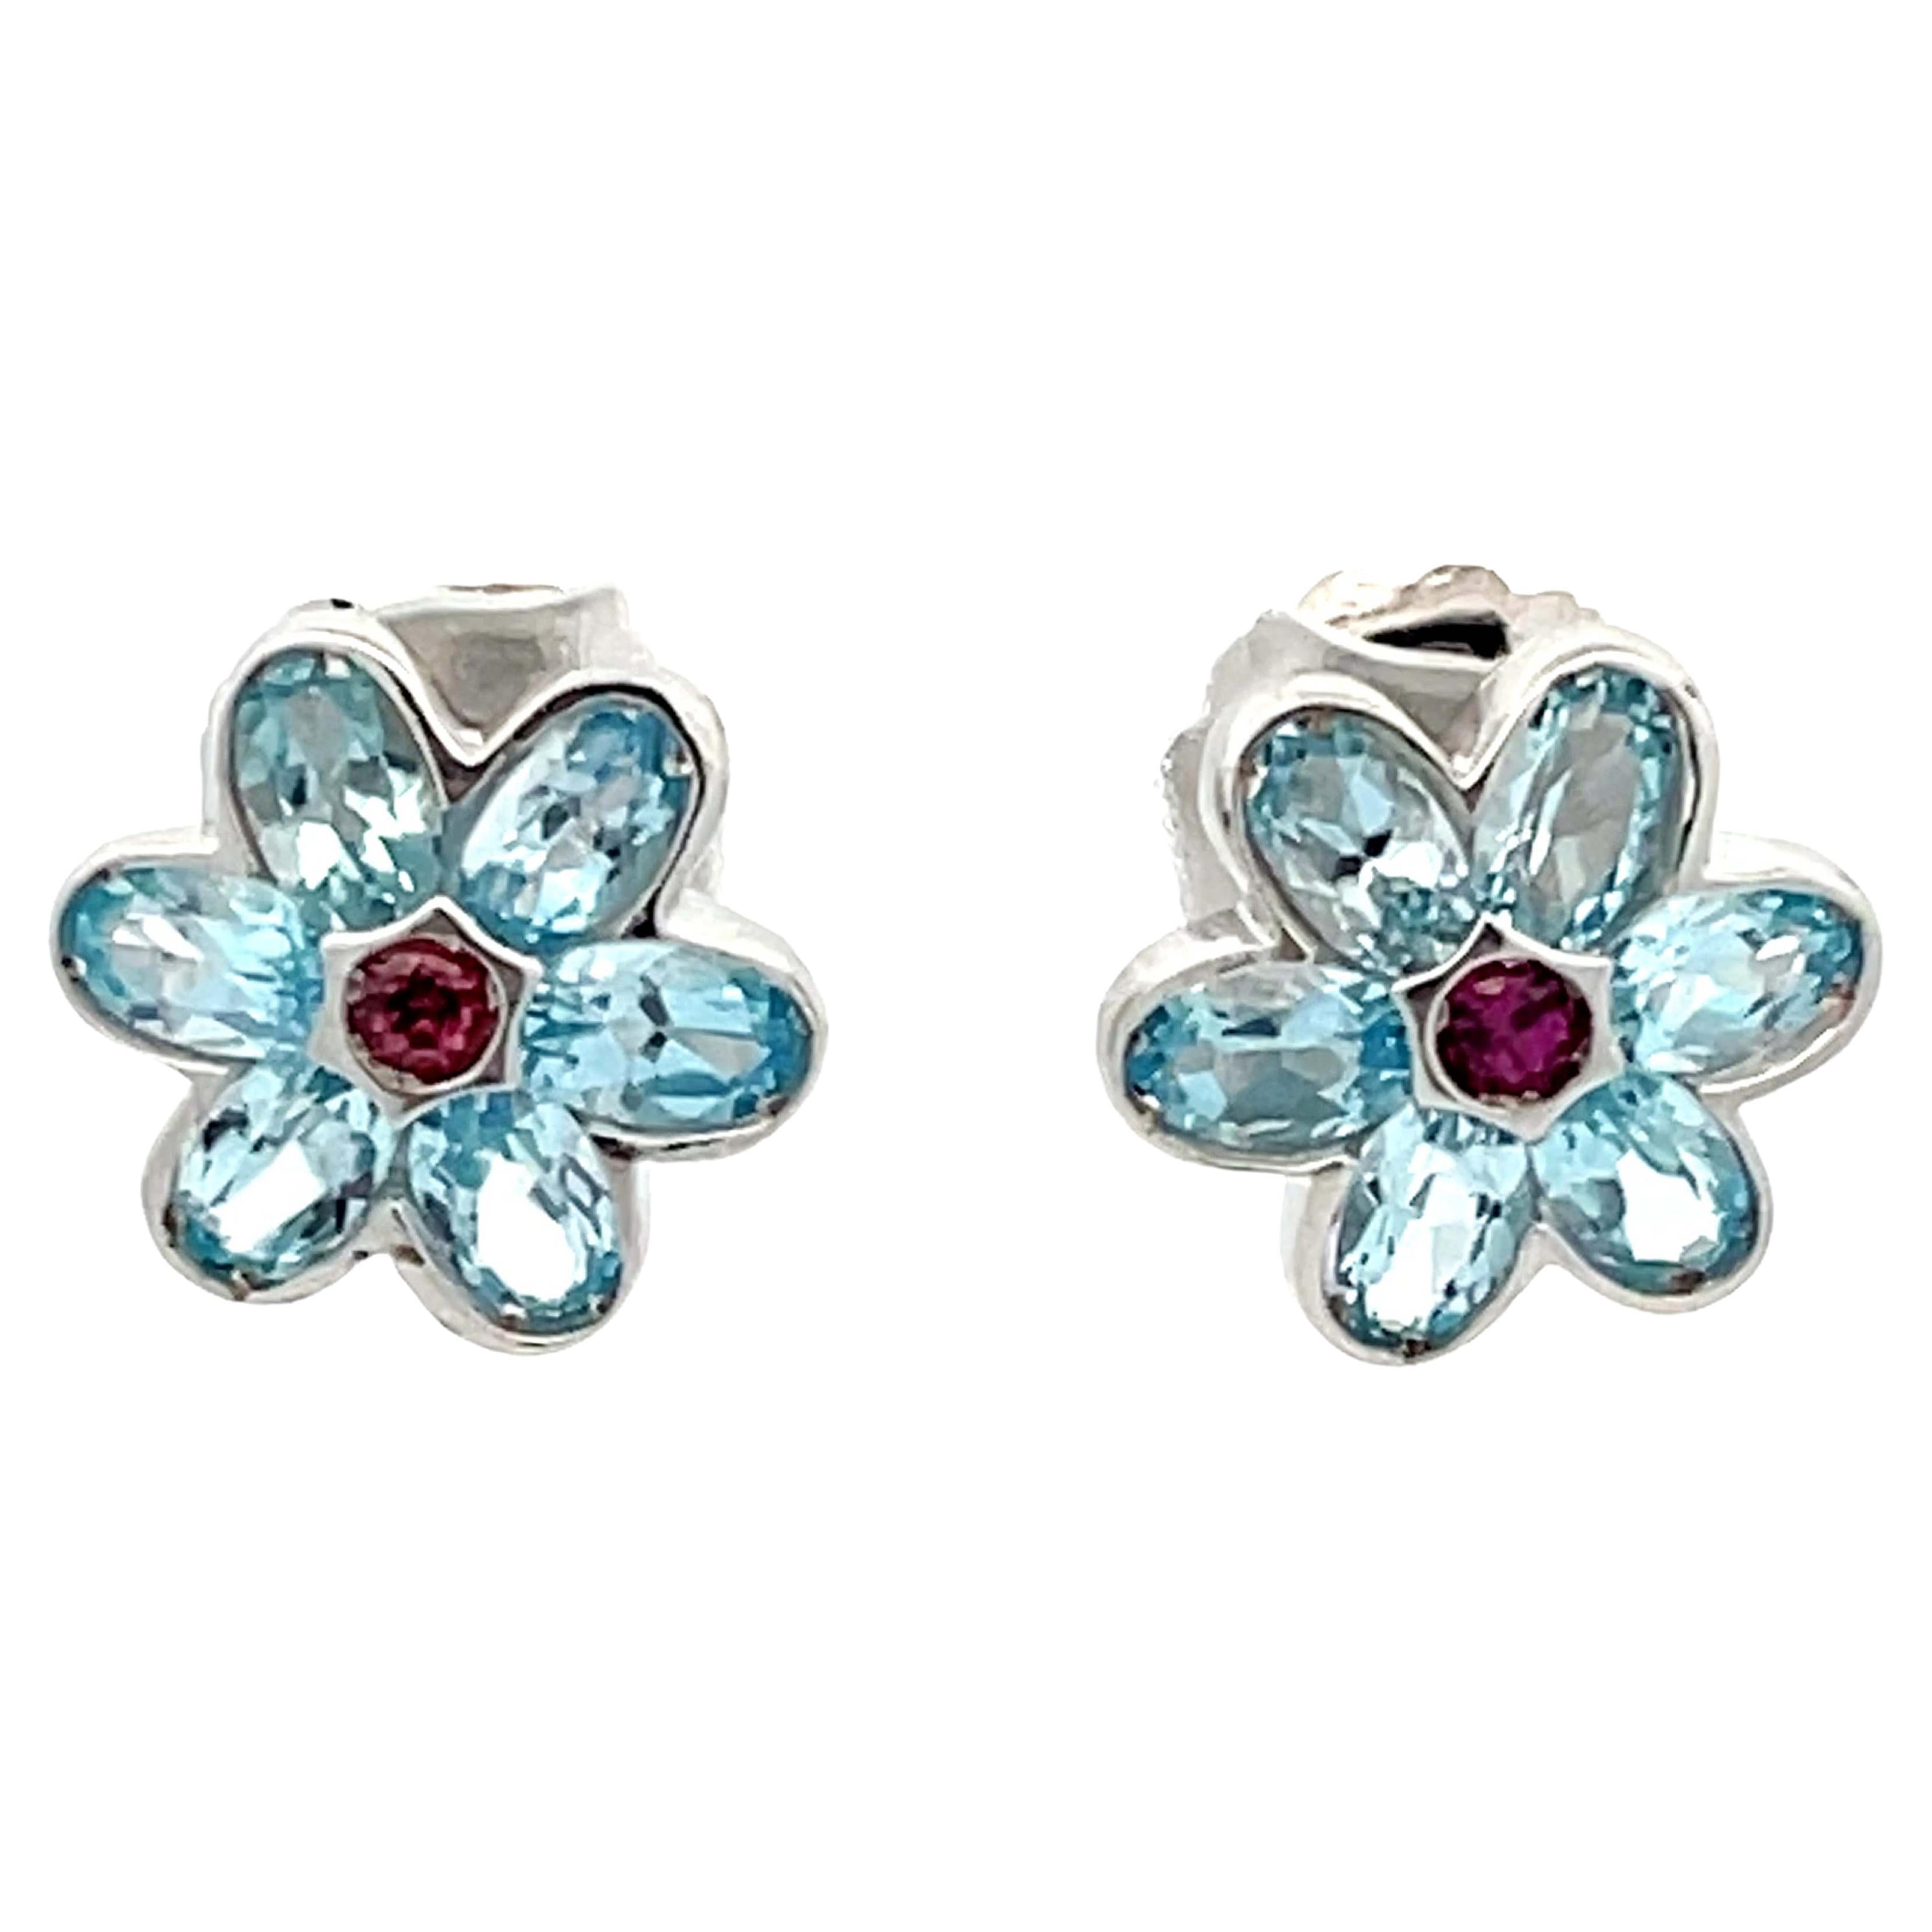 Blue Topaz and Pink Tourmaline Flower Earrings in 14k White Gold For Sale